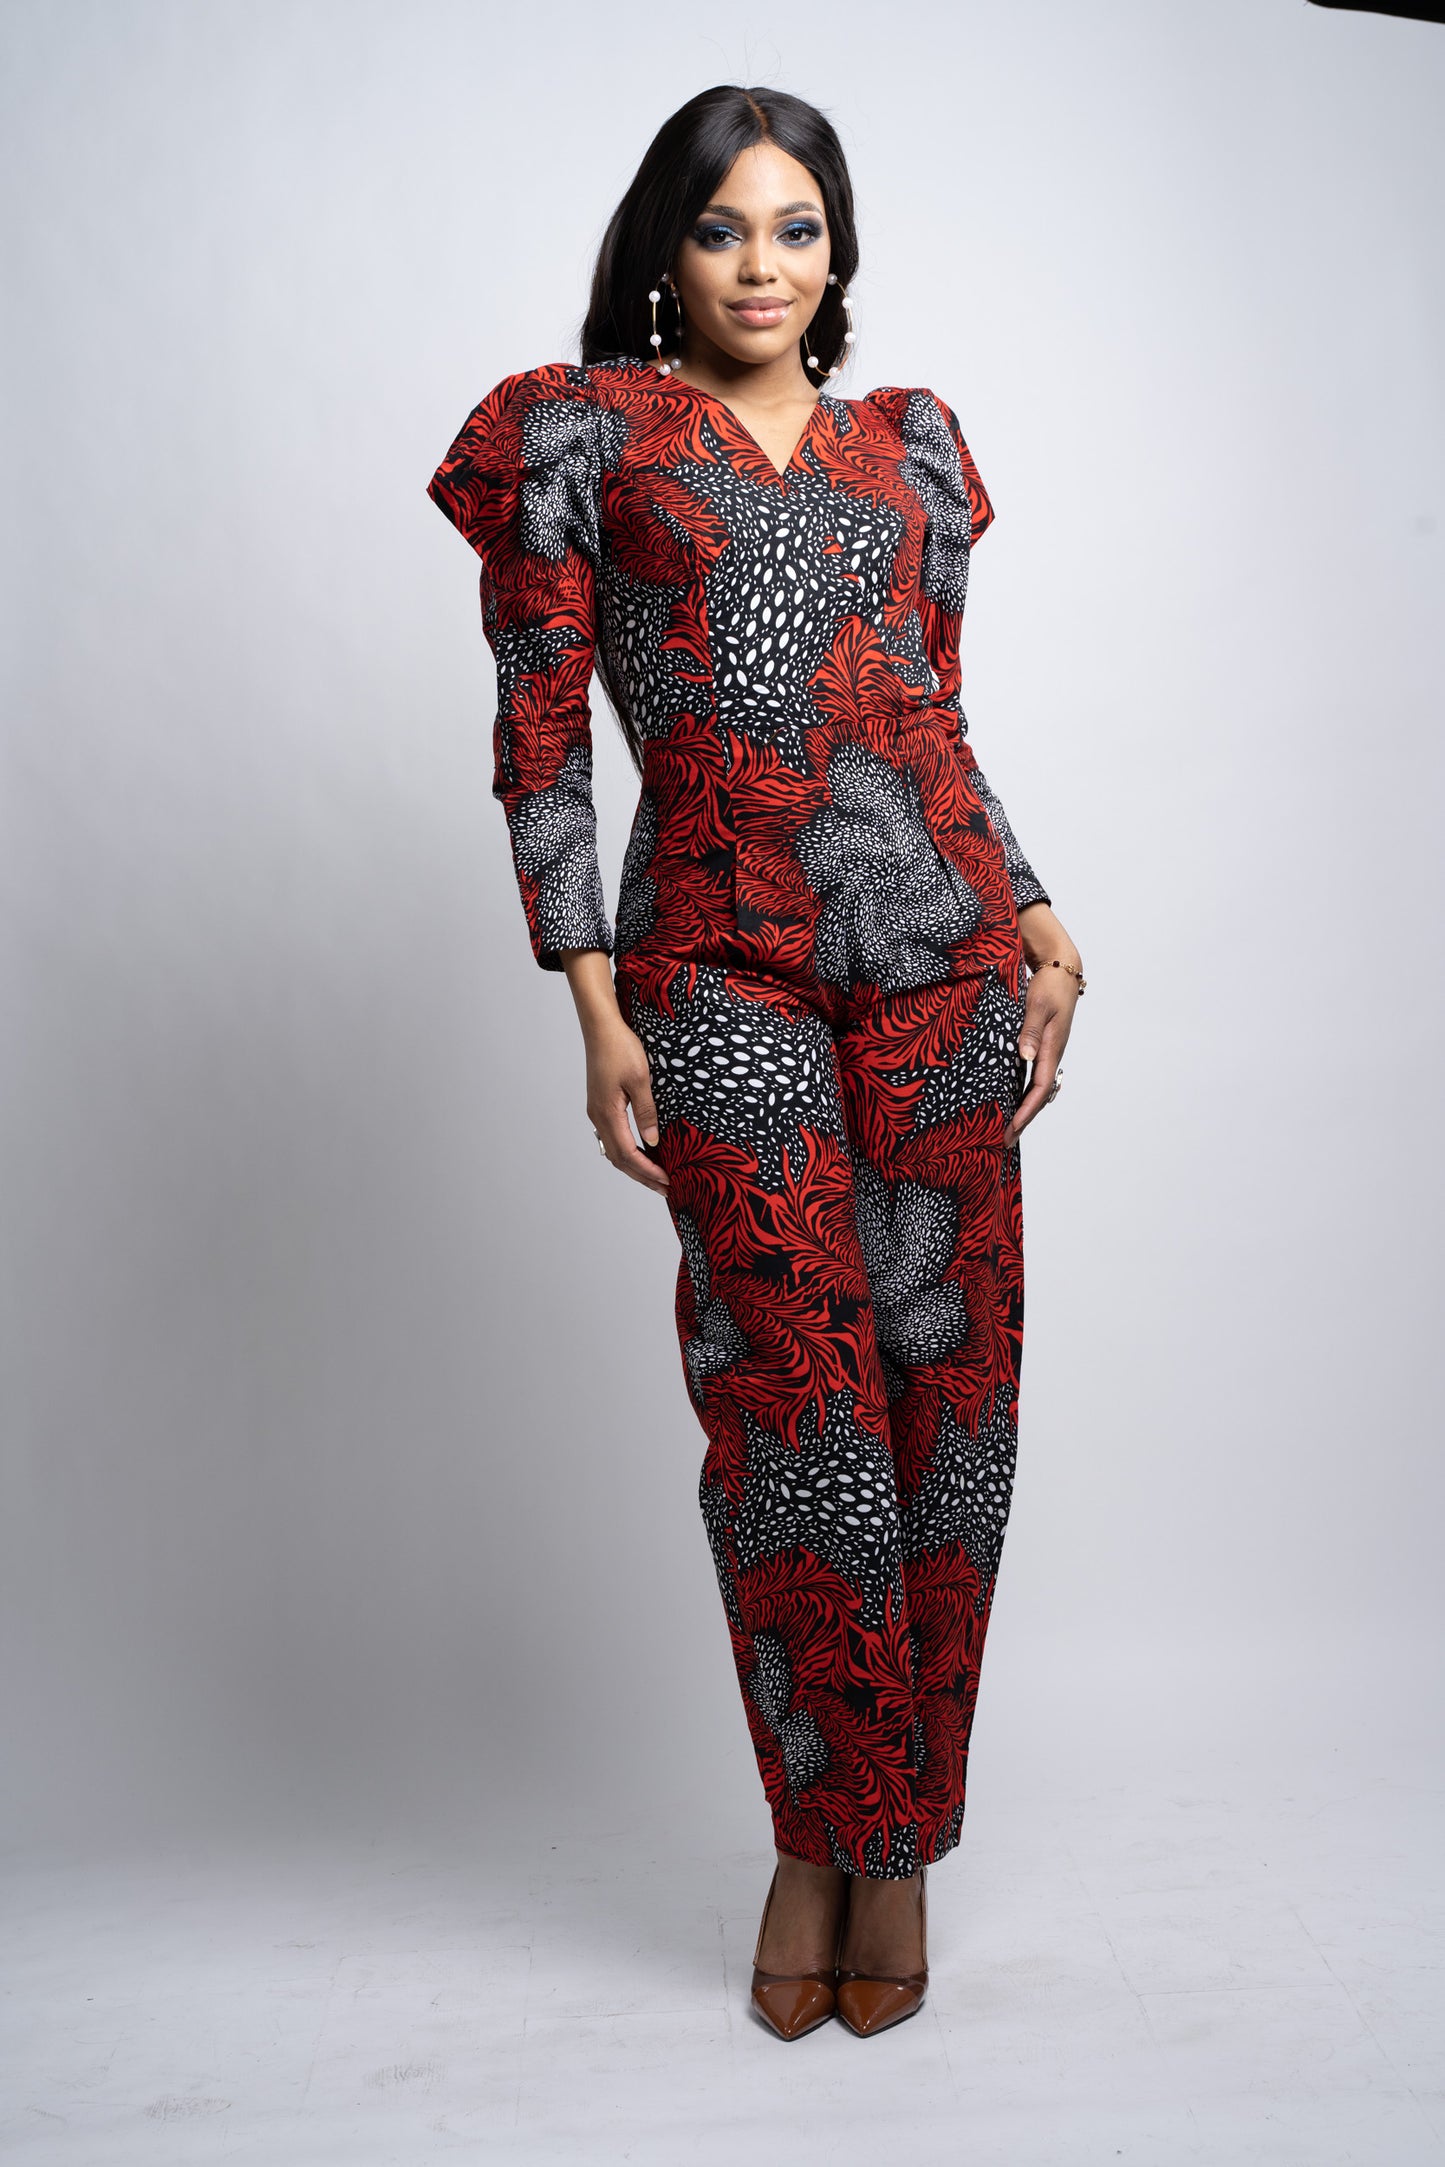 PASSION - Women's jumpsuit with African print